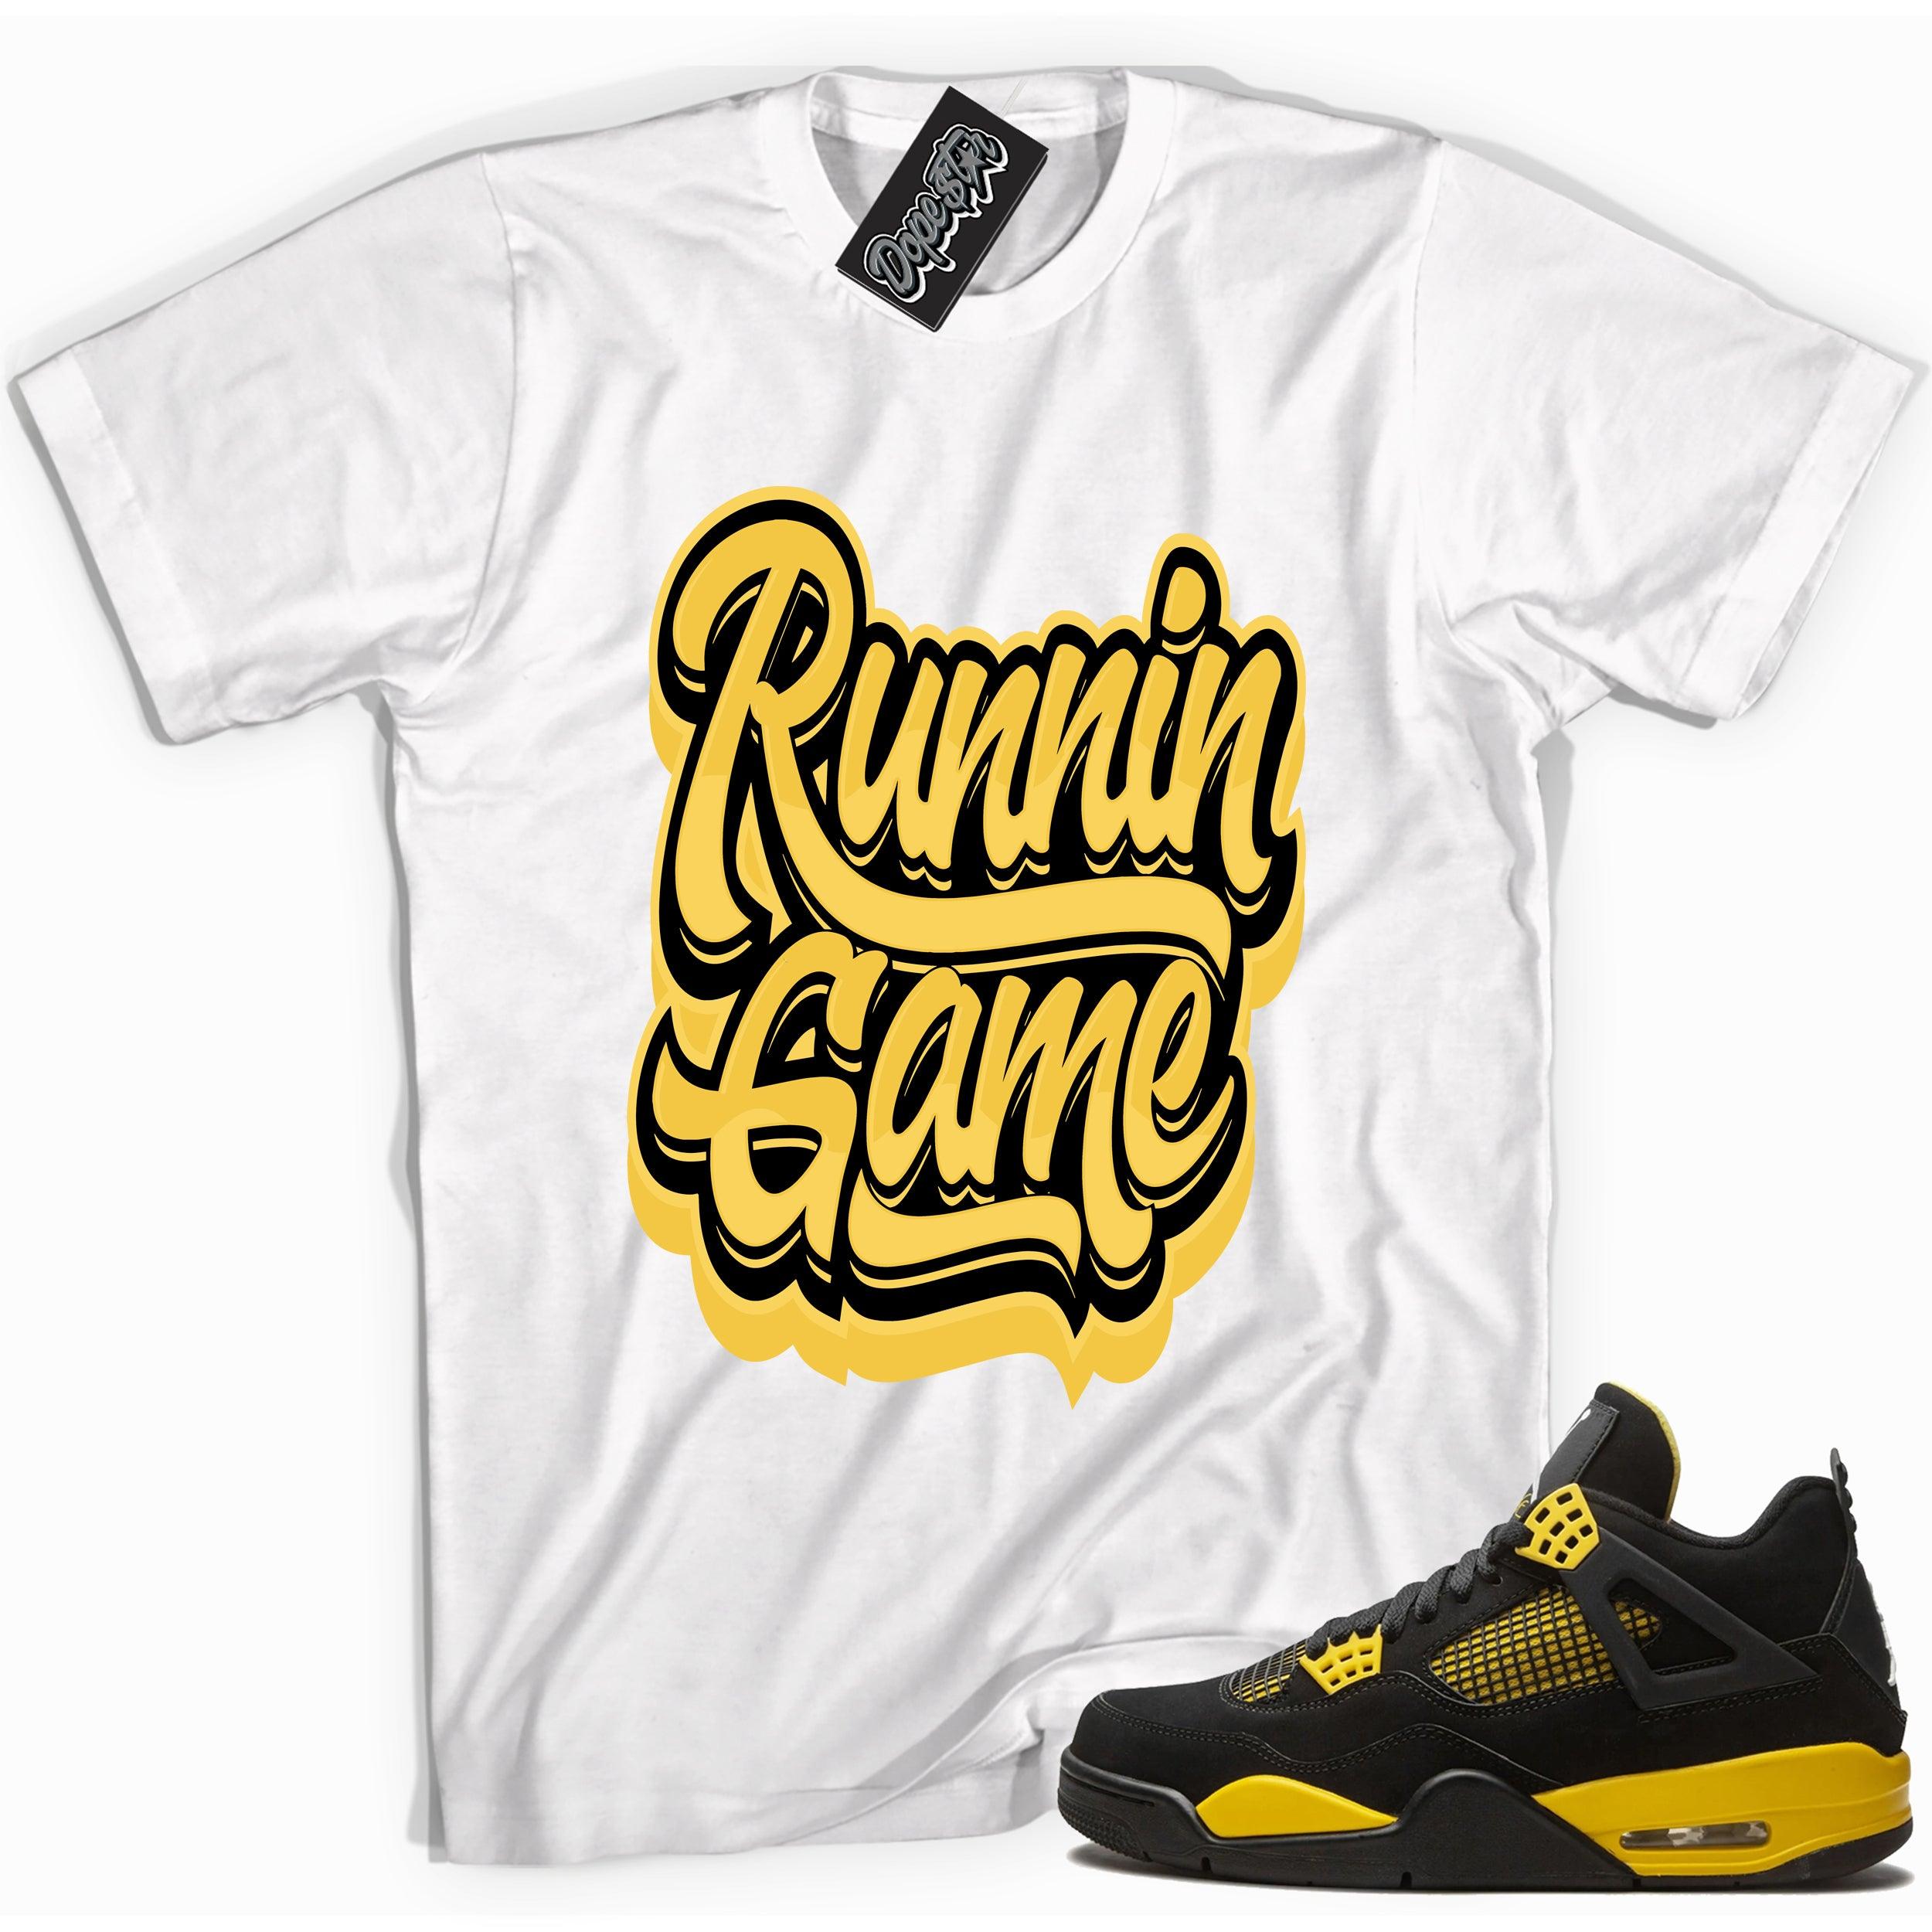 Cool white graphic tee with 'running game' print, that perfectly matches Air Jordan 4 Thunder sneakers